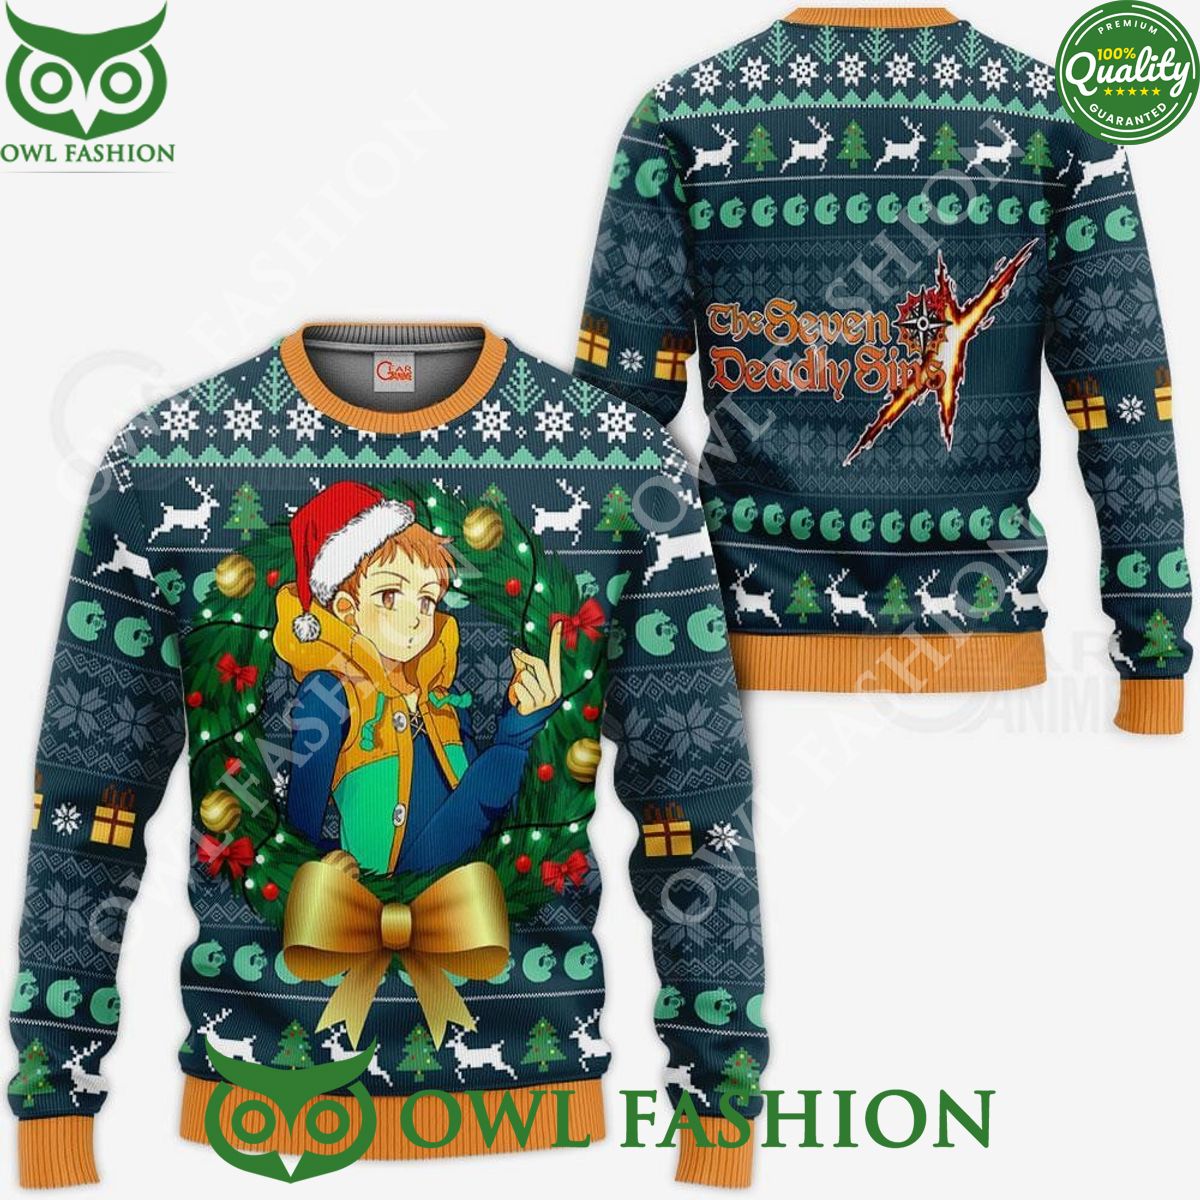 Fairy King Ugly Christmas Sweater Jumper Xmas Gift Natural and awesome